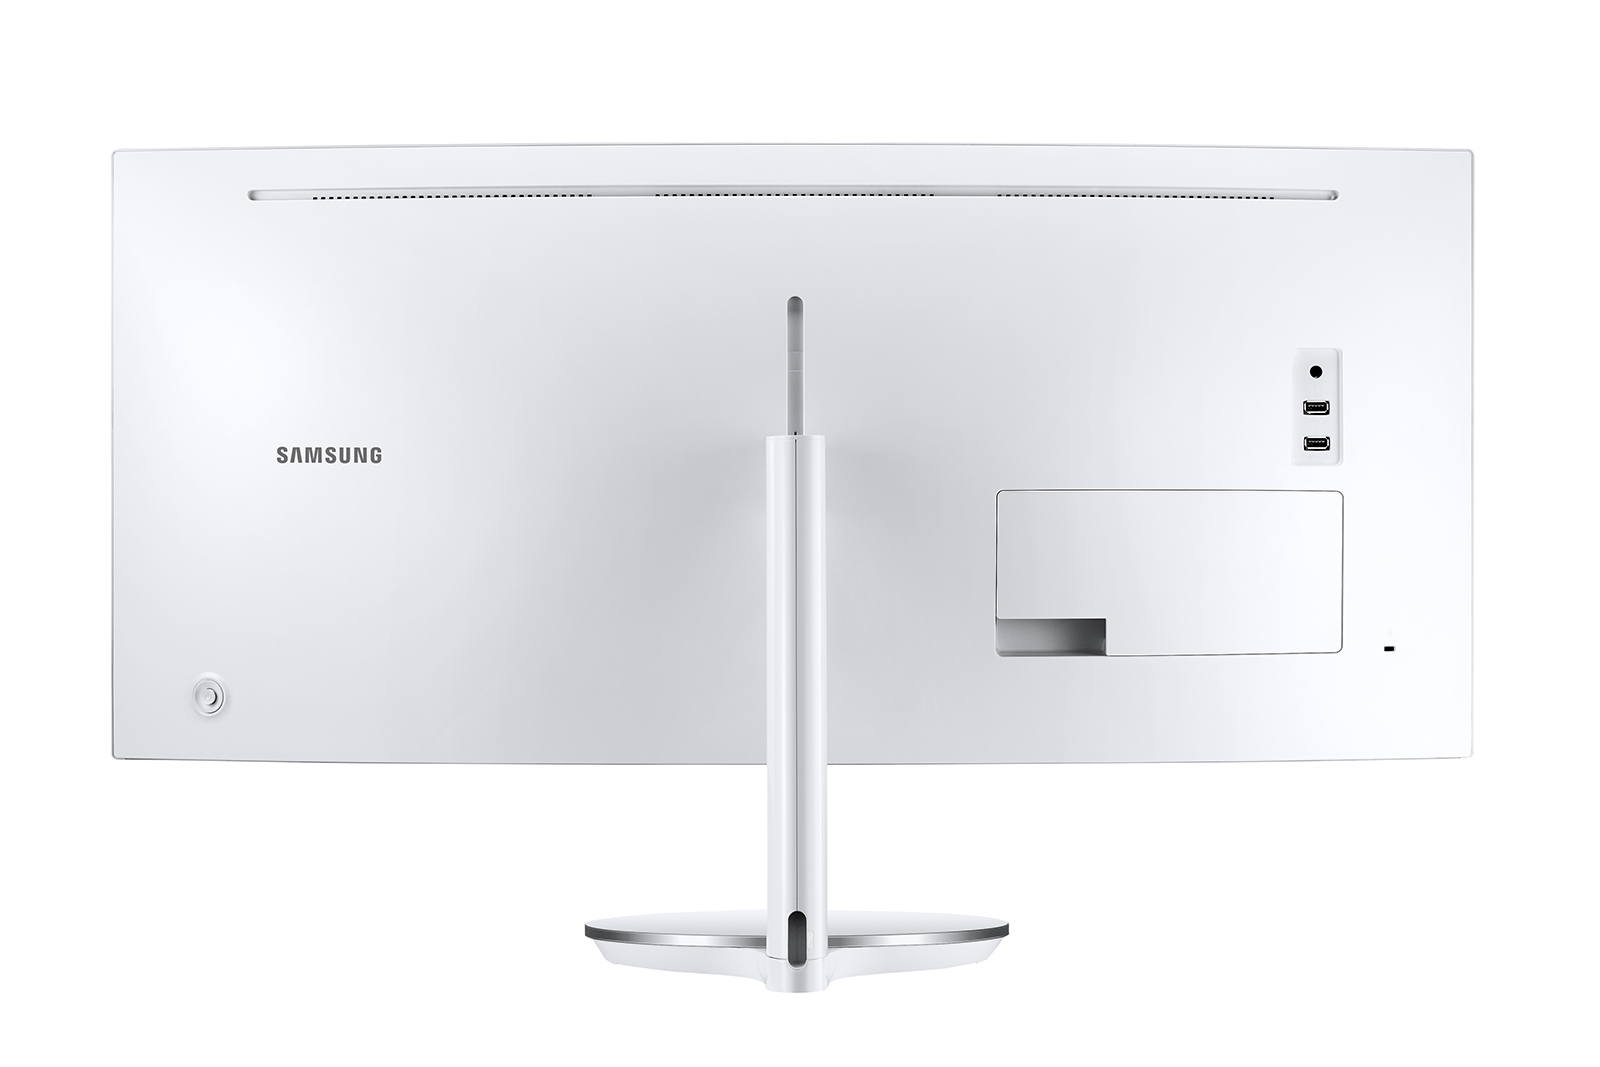 Review: Samsung's 34-inch ultra wide monitor with Thunderbolt 3 is a  tempting choice for MacBook users - 9to5Mac